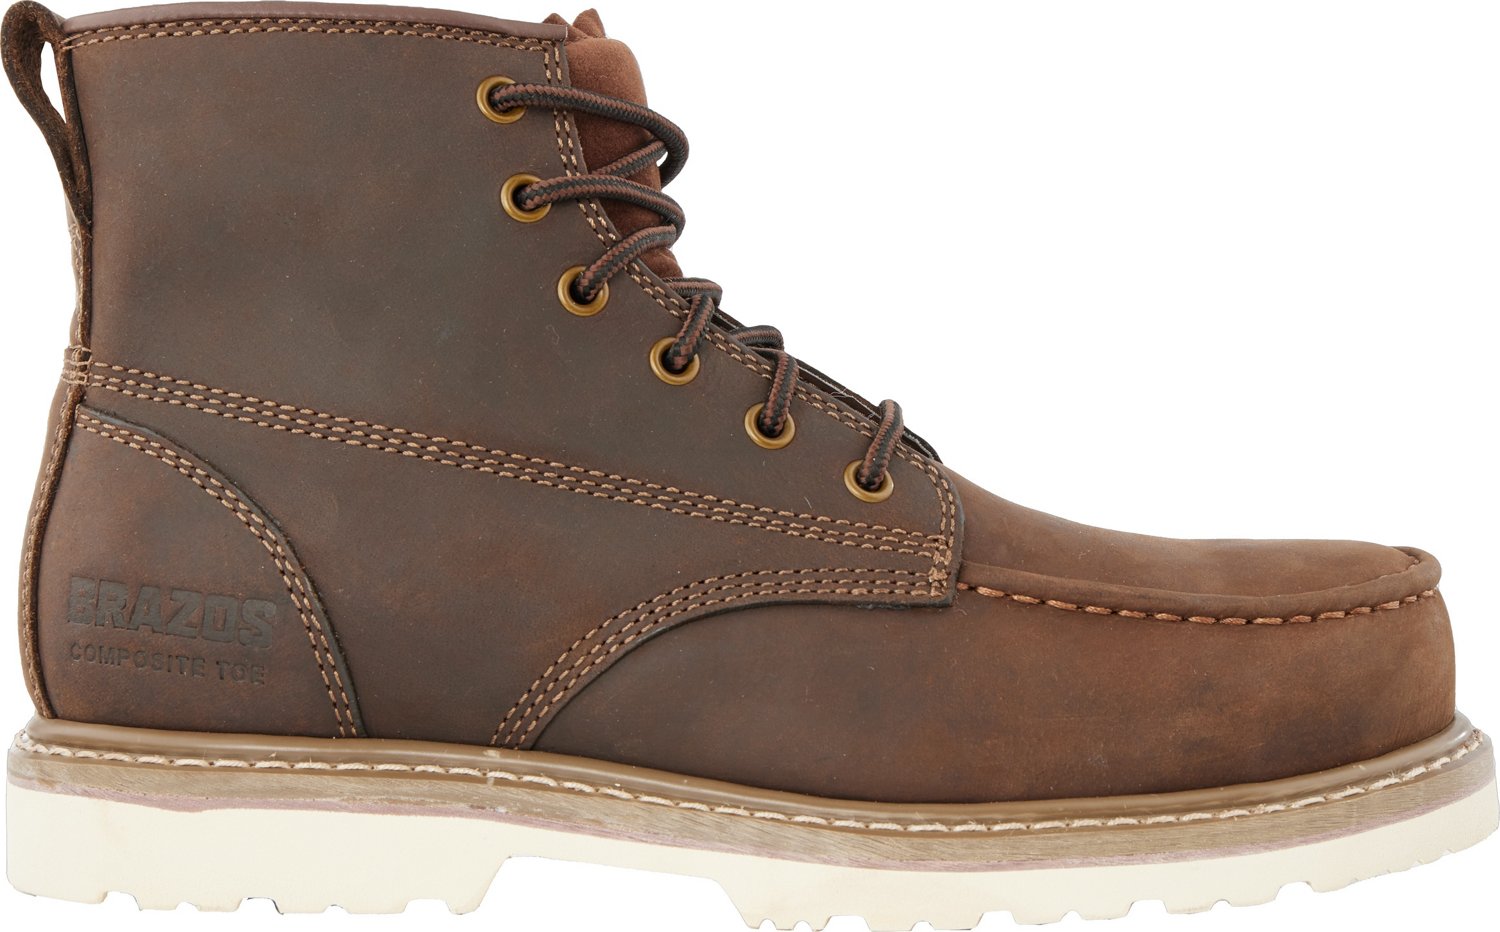 Brazos Mens Wyatt EH Composite Toe Lace Up Work Boots